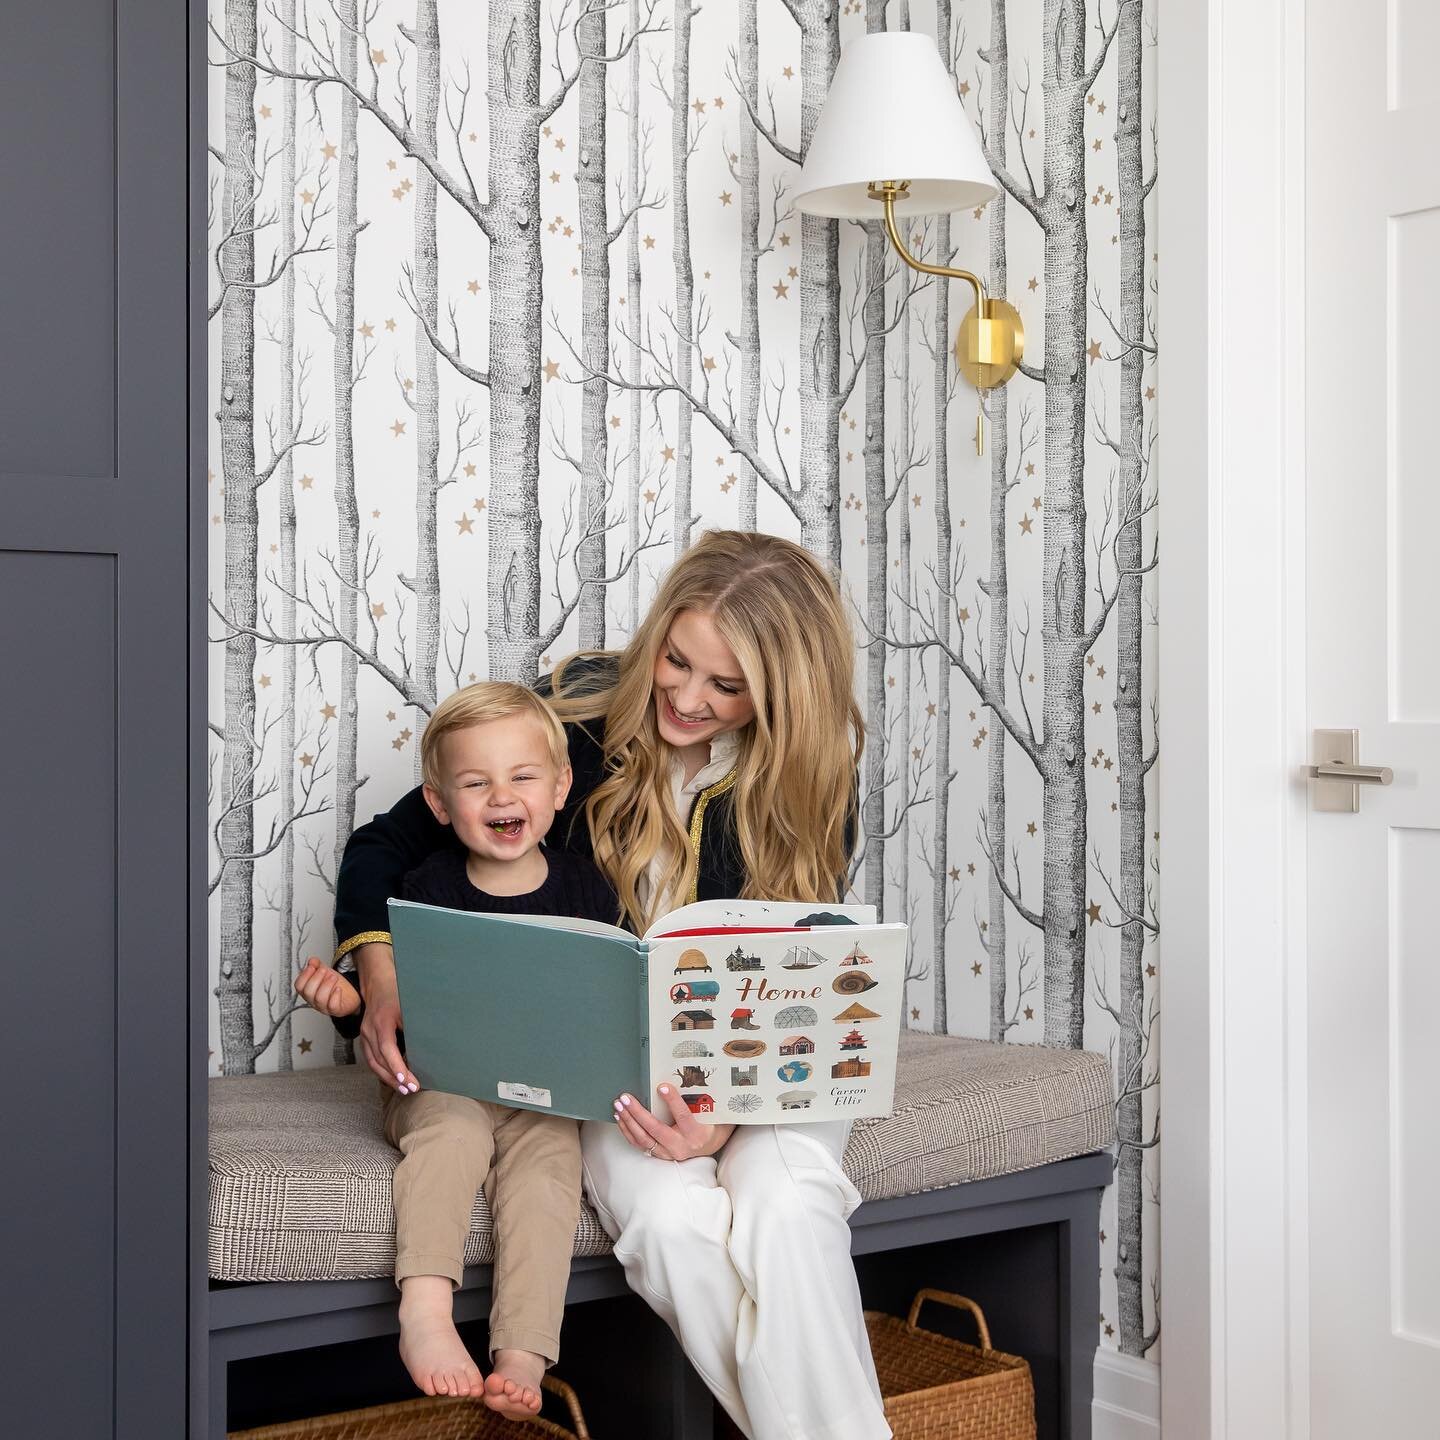 How we love the little tucked away quiet places in some of our favorite homes! Creating magical memories for years to come ✨
.
.
.
.
.
Design: @suzanne_mcaleer 
Styled: @noellewrightstyles 
Photo: @lindsay_salazar_photography 
Build: @cameohomesinc 
